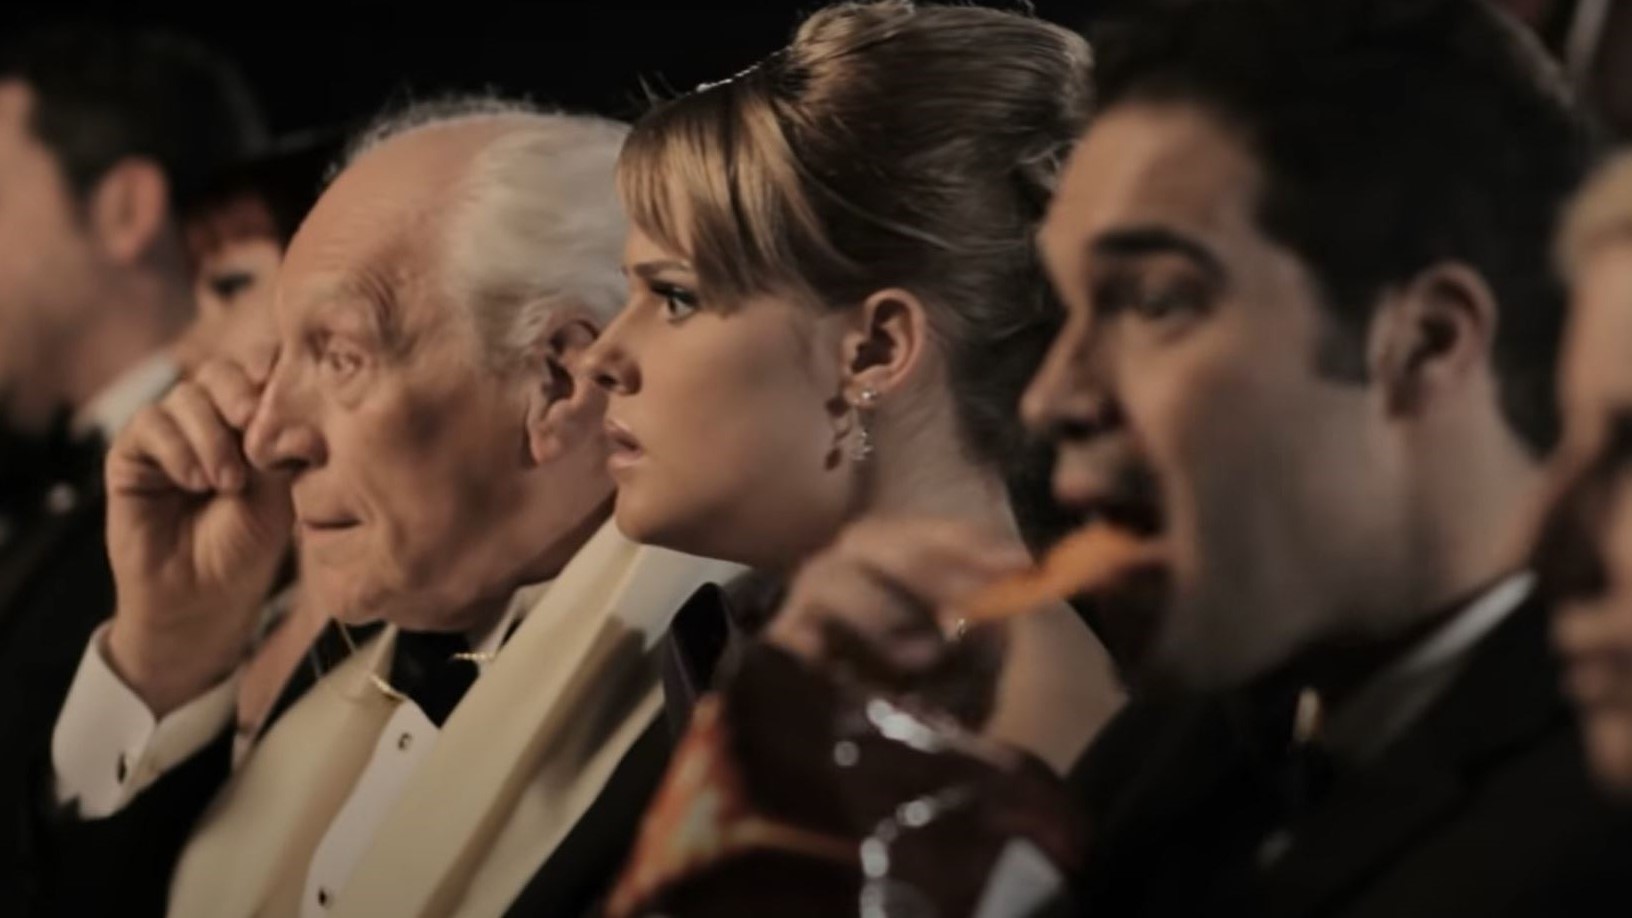 A man in the audience of an opera munches loudly on Doritos. Other opera patrons look on with frustration.